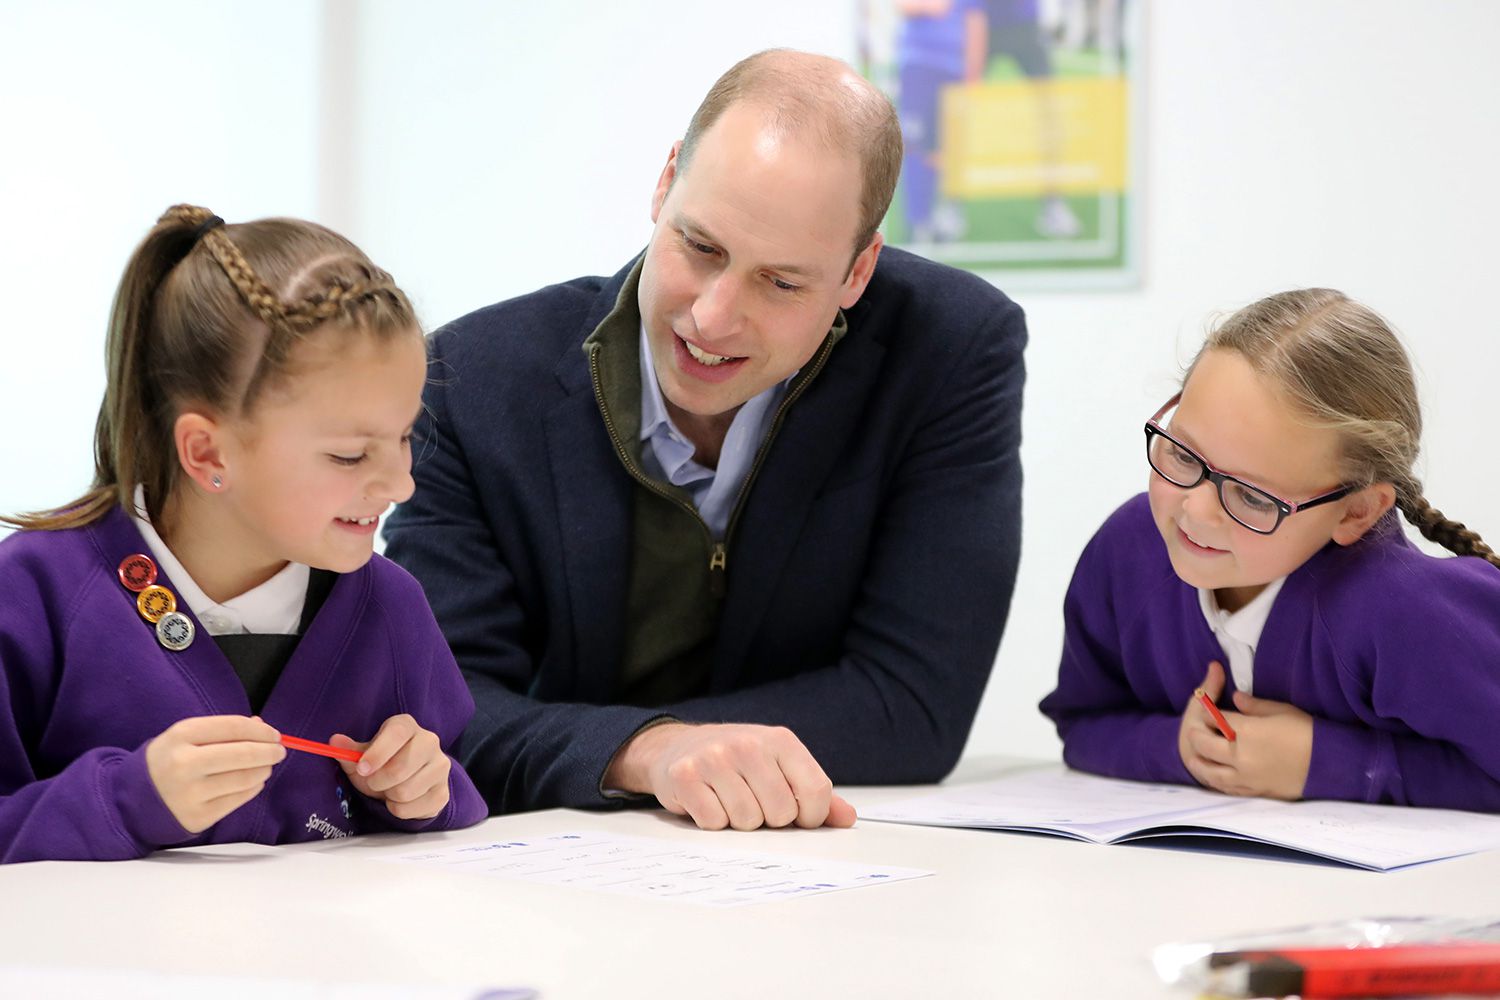 Prince William, Duke of Cambridge plays Emoji Bingo with kids of Springwell Park Community Primary School during his visit at Everton Football Club's official charity Everton in the Community as part of the Heads Up campaign on January 30, 2020 in Liverpool